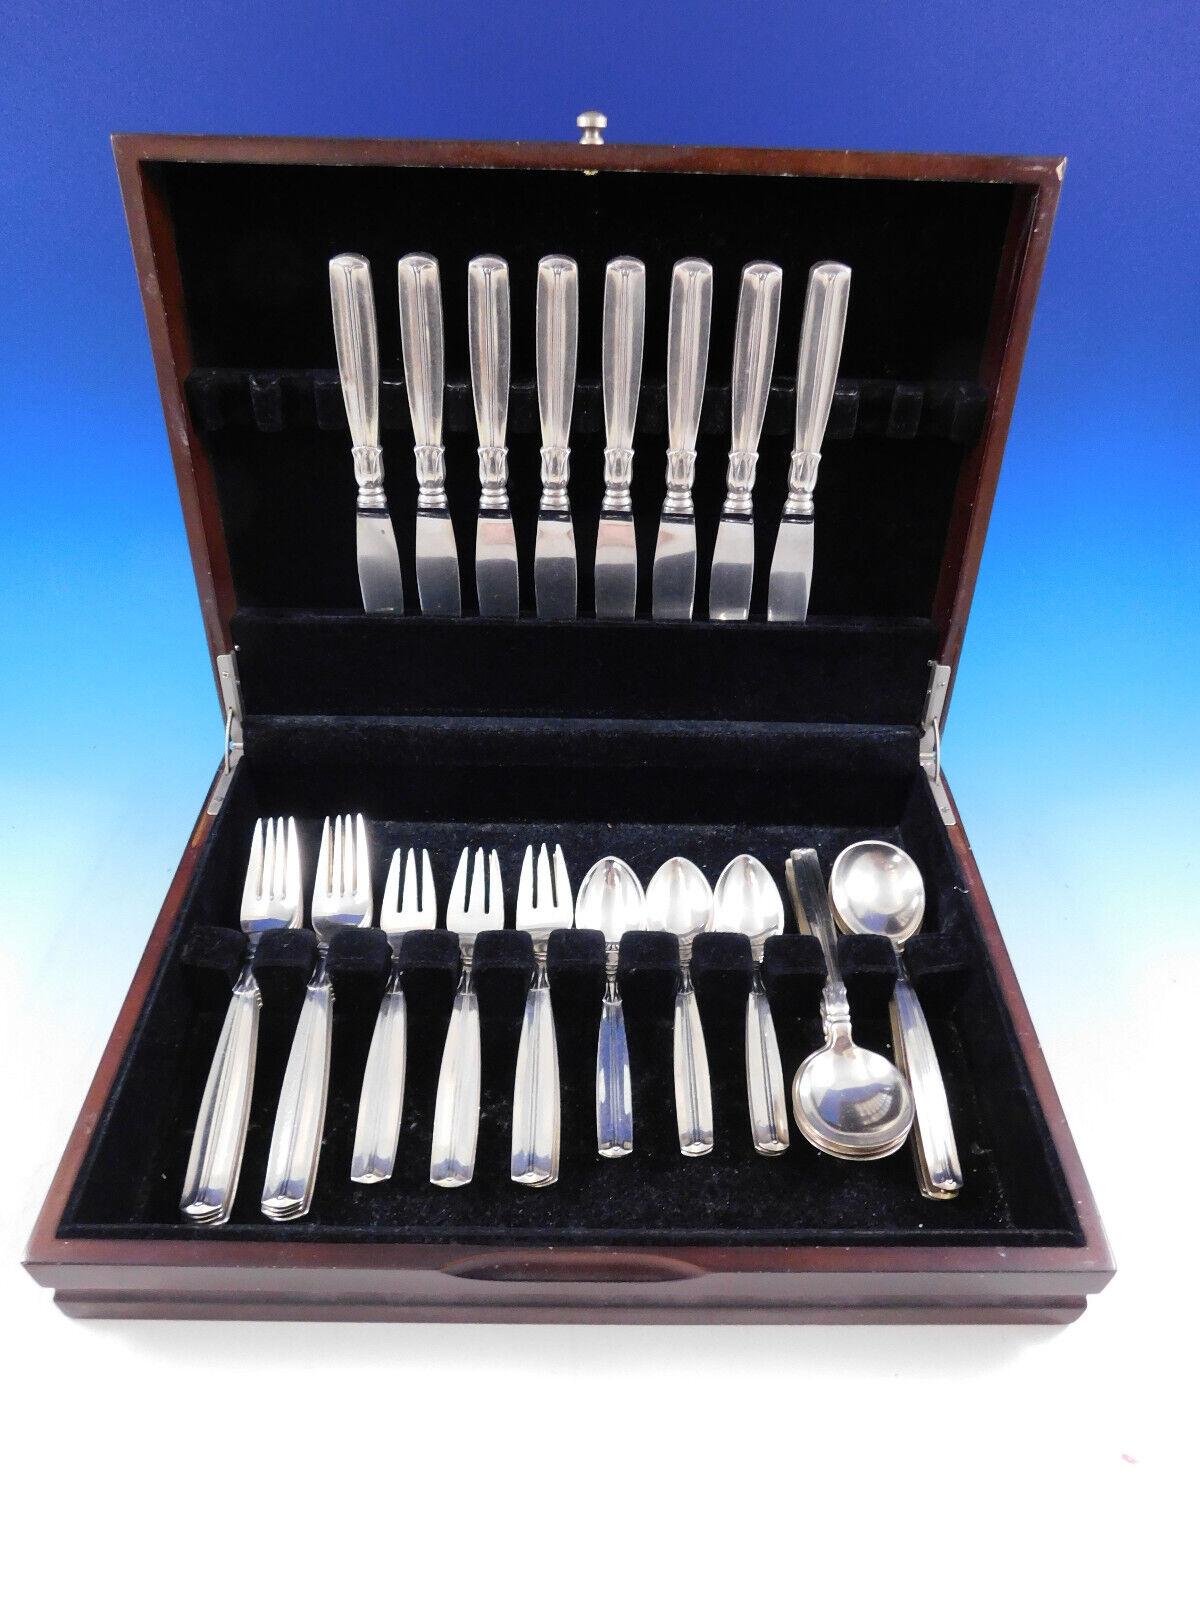 Lotus by W&S Sorensen Danish sterling silver Scandinavian Modern flatware set, 40 pieces. This set includes:

8 Knives, 9